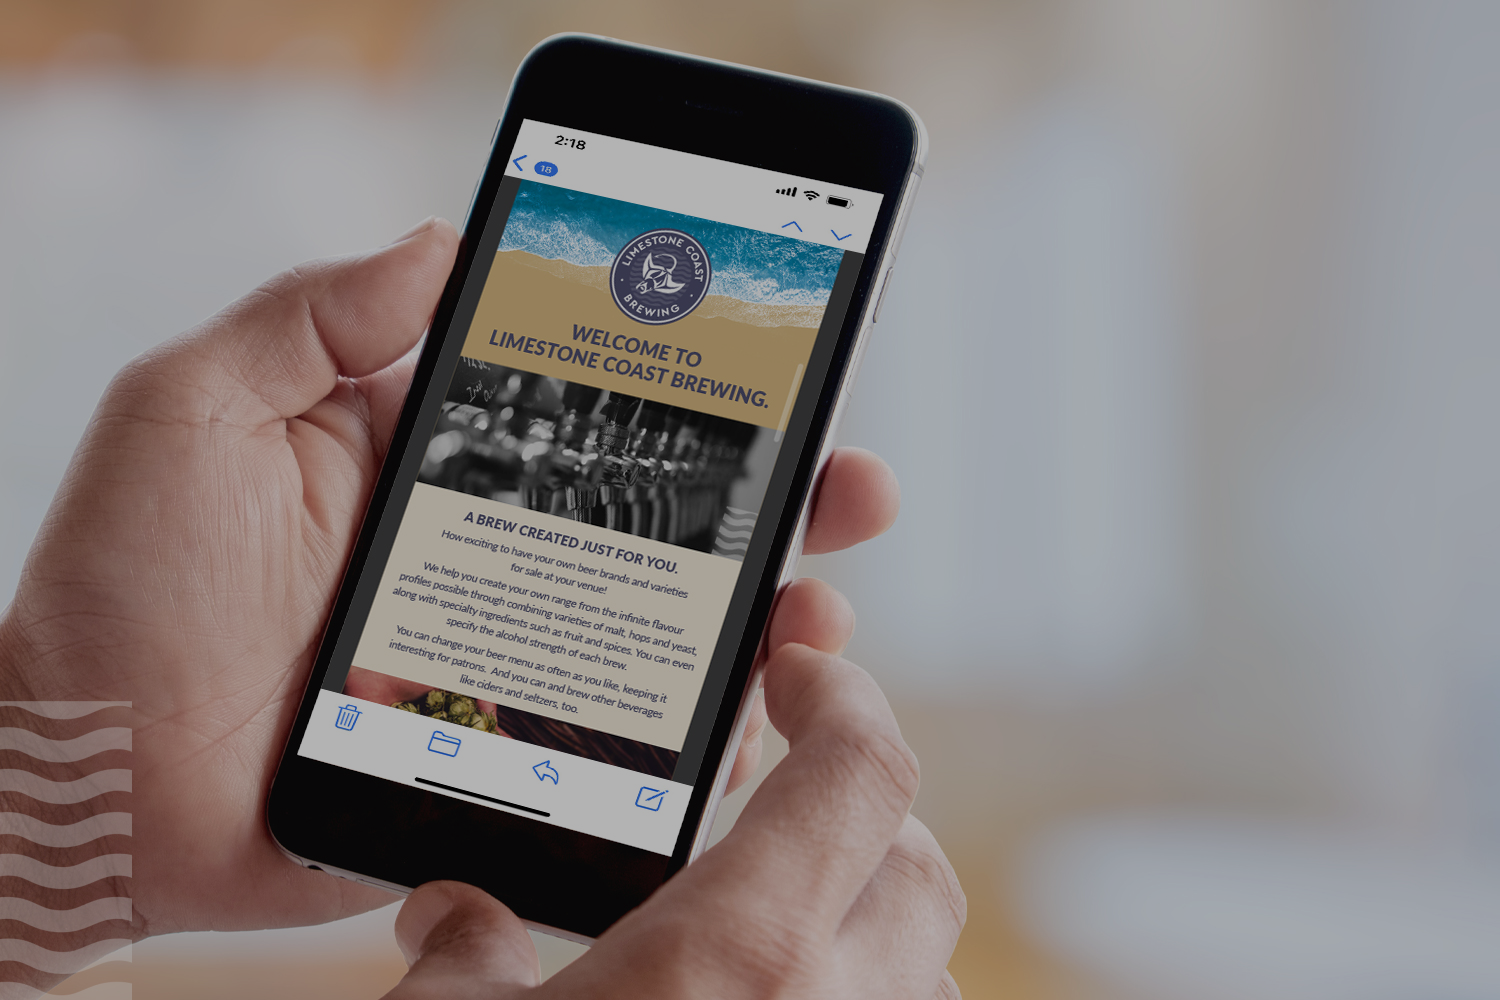 Mobile phone with subscribe page open on Limestone Coast Brewing website.